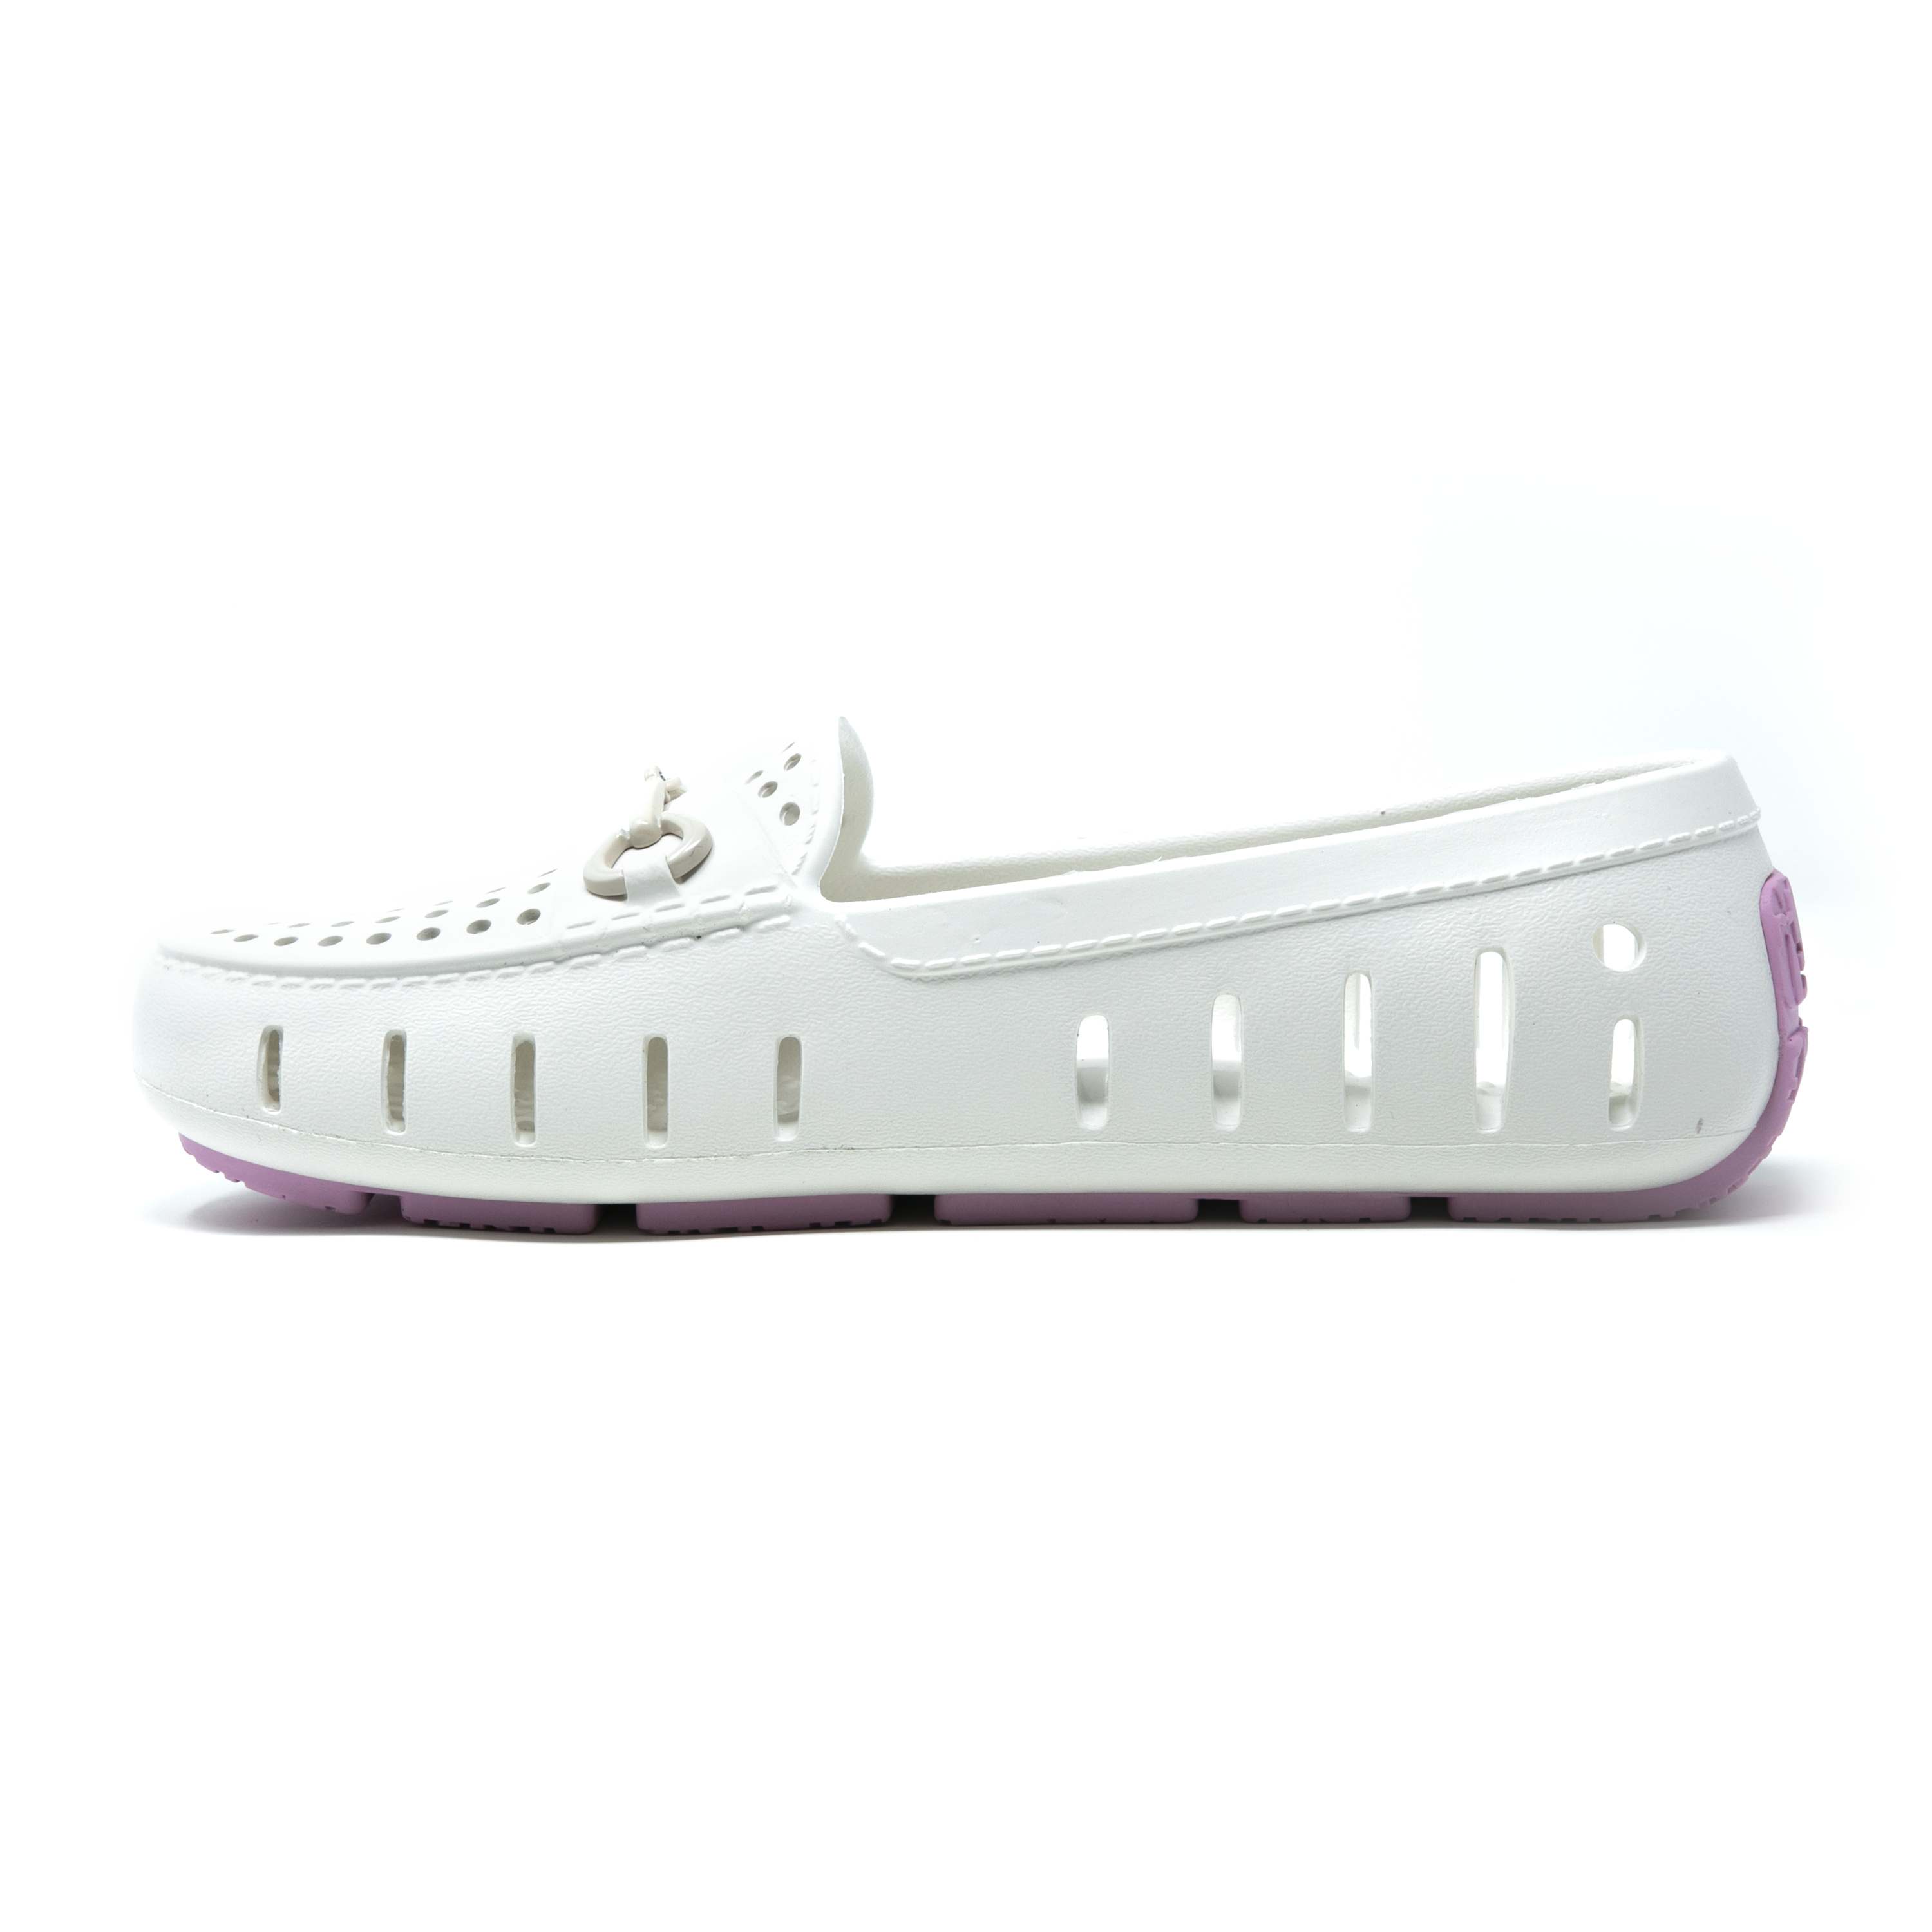 COCONUT/LAVENDER PINK - WOMENS